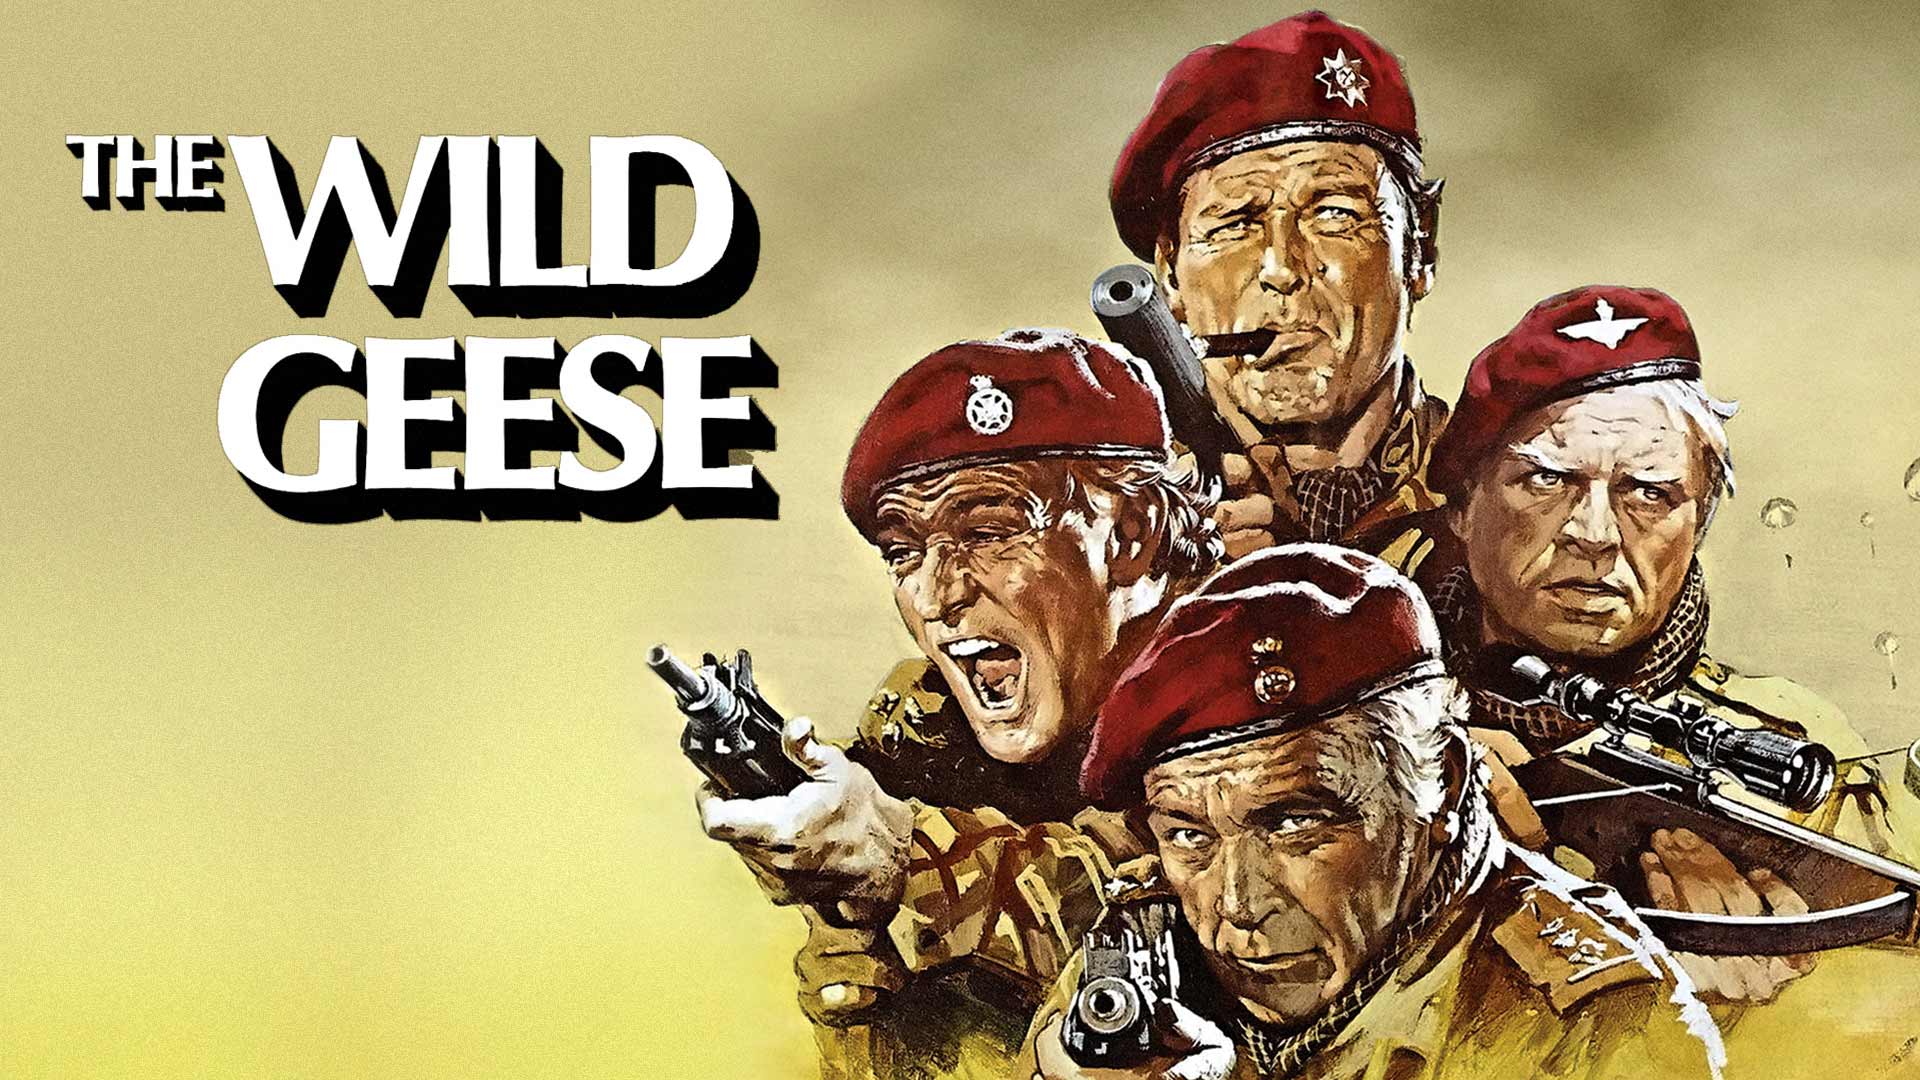 The Wild Geese